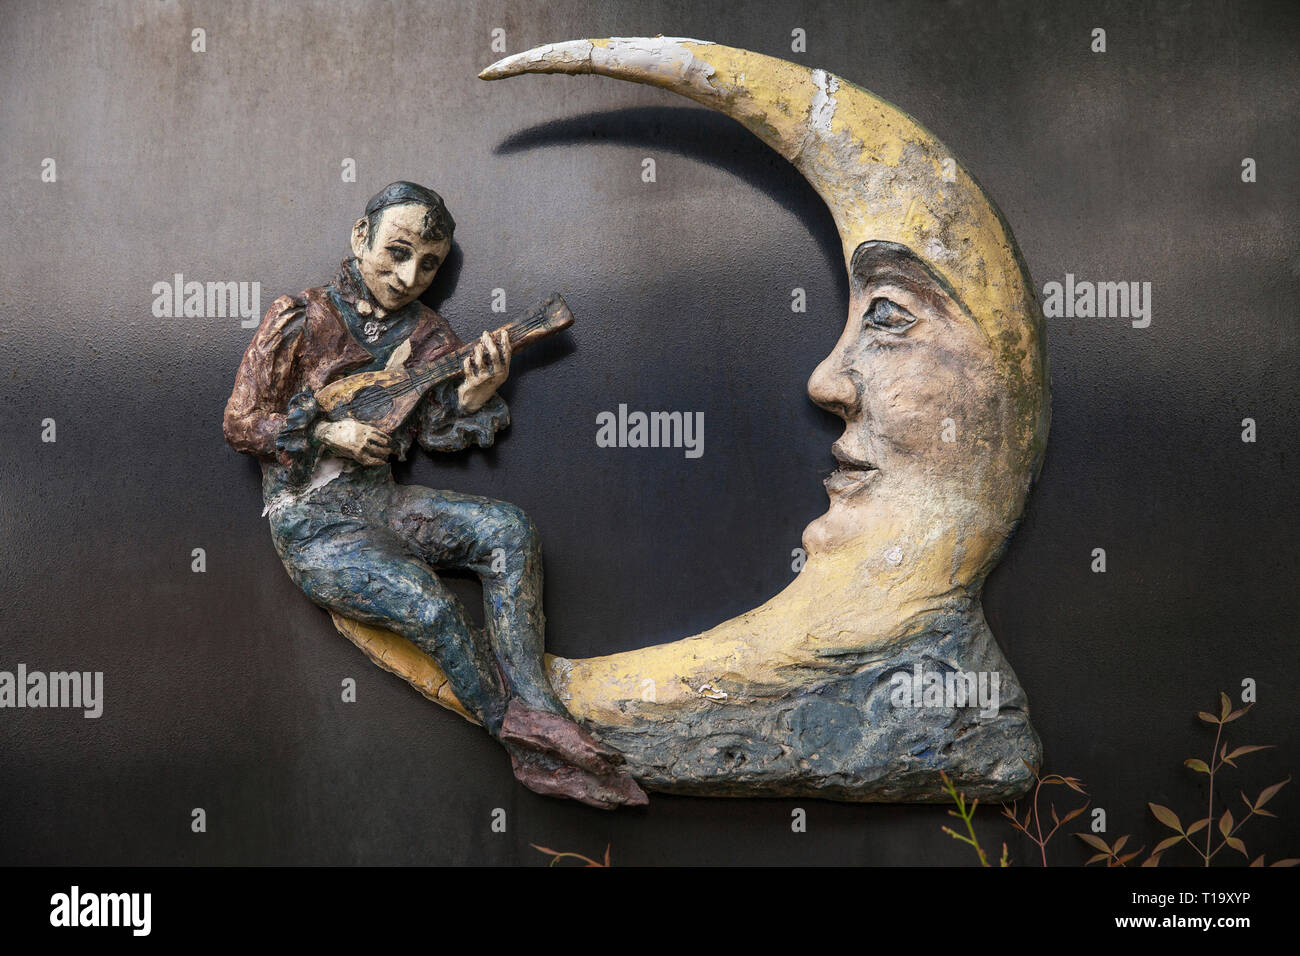 Sculpture of musician sitting on a crescent moon in Kyoto, Japan Stock Photo